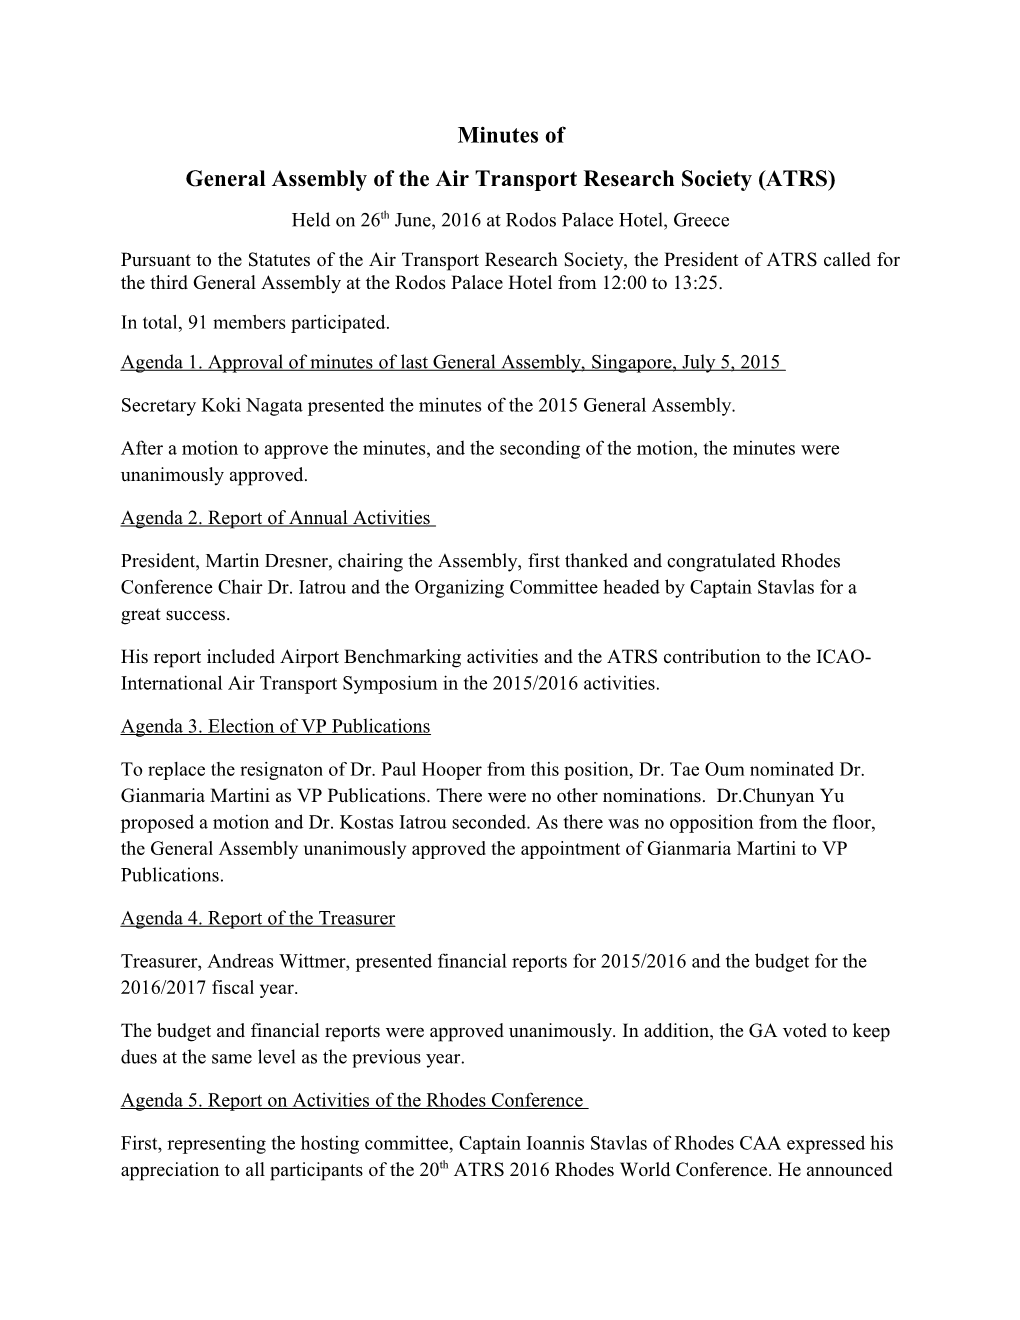 General Assembly of the Air Transport Research Society (ATRS)